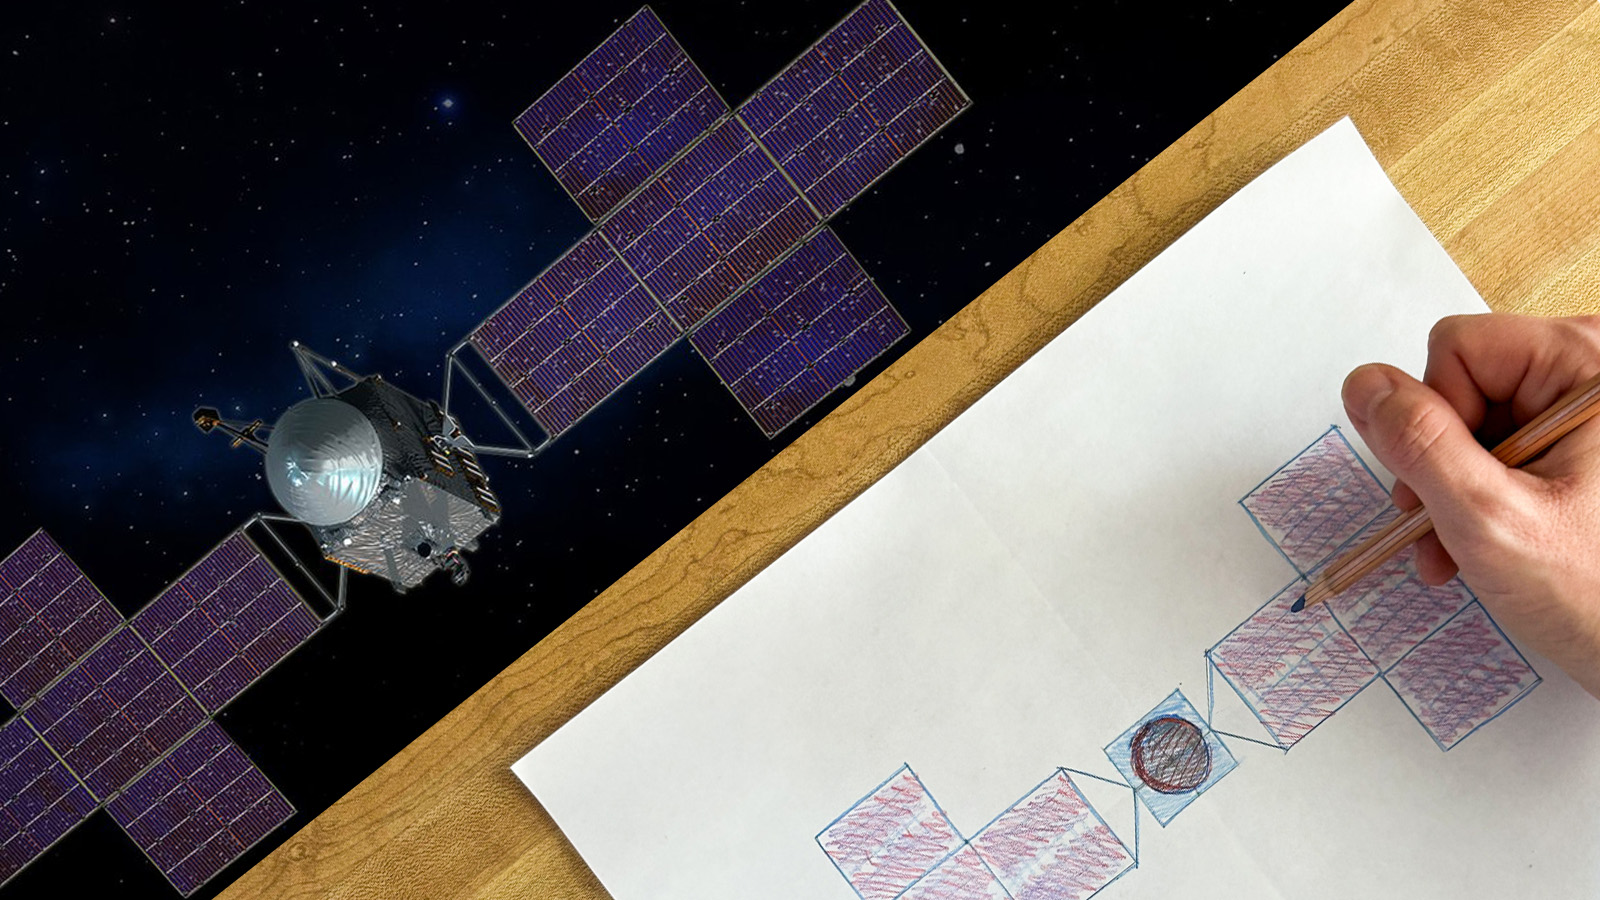 A split image with an illustration of the Psyche spacecraft on top, and a hand holding a pencil and drawing the spacecraft on a sketch pad on the bottom.